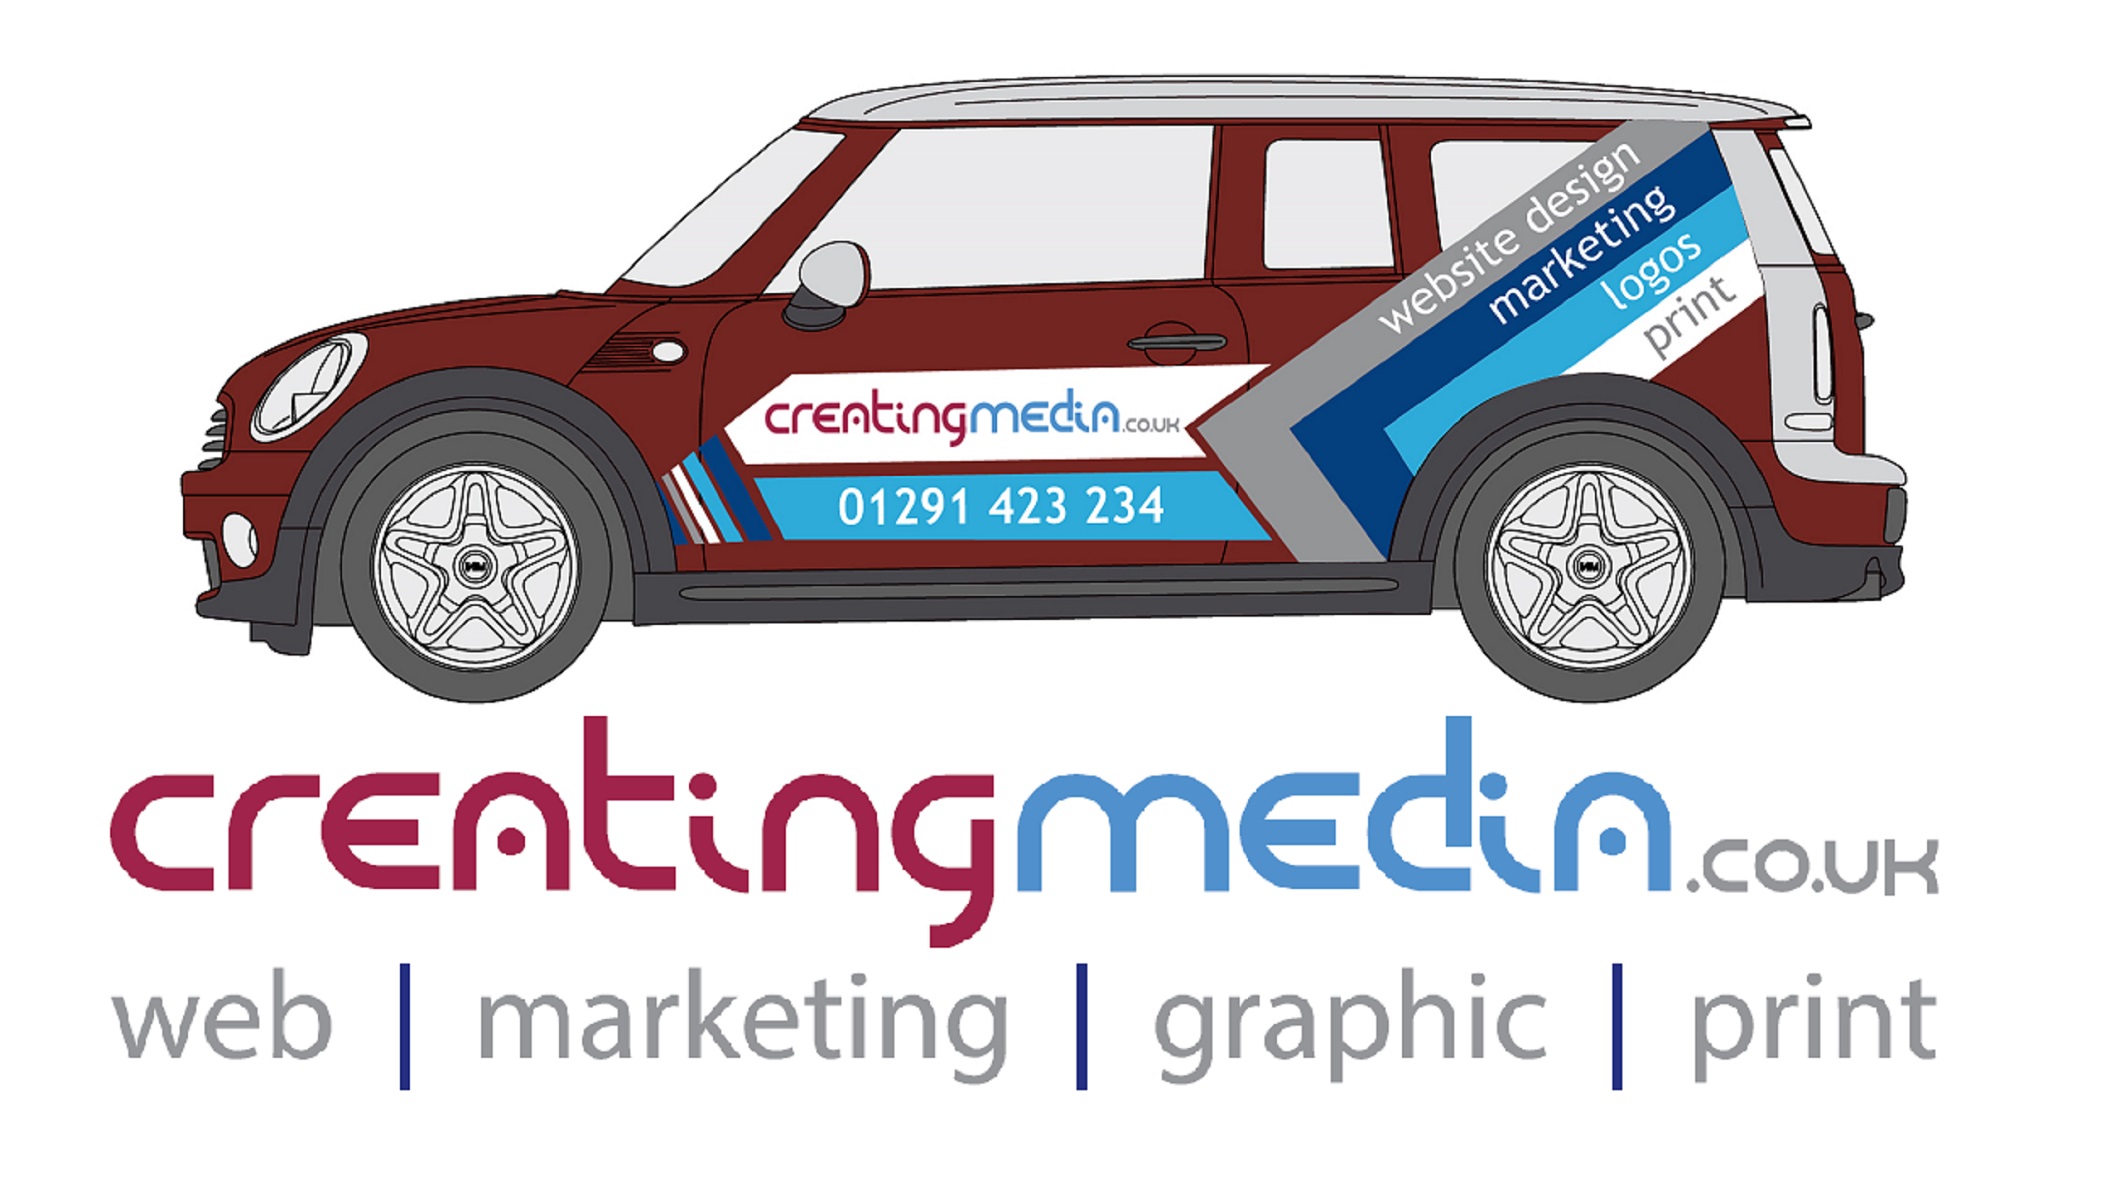 Creating Media are exhibiting at the Sterling Integrity Show in Cardiff